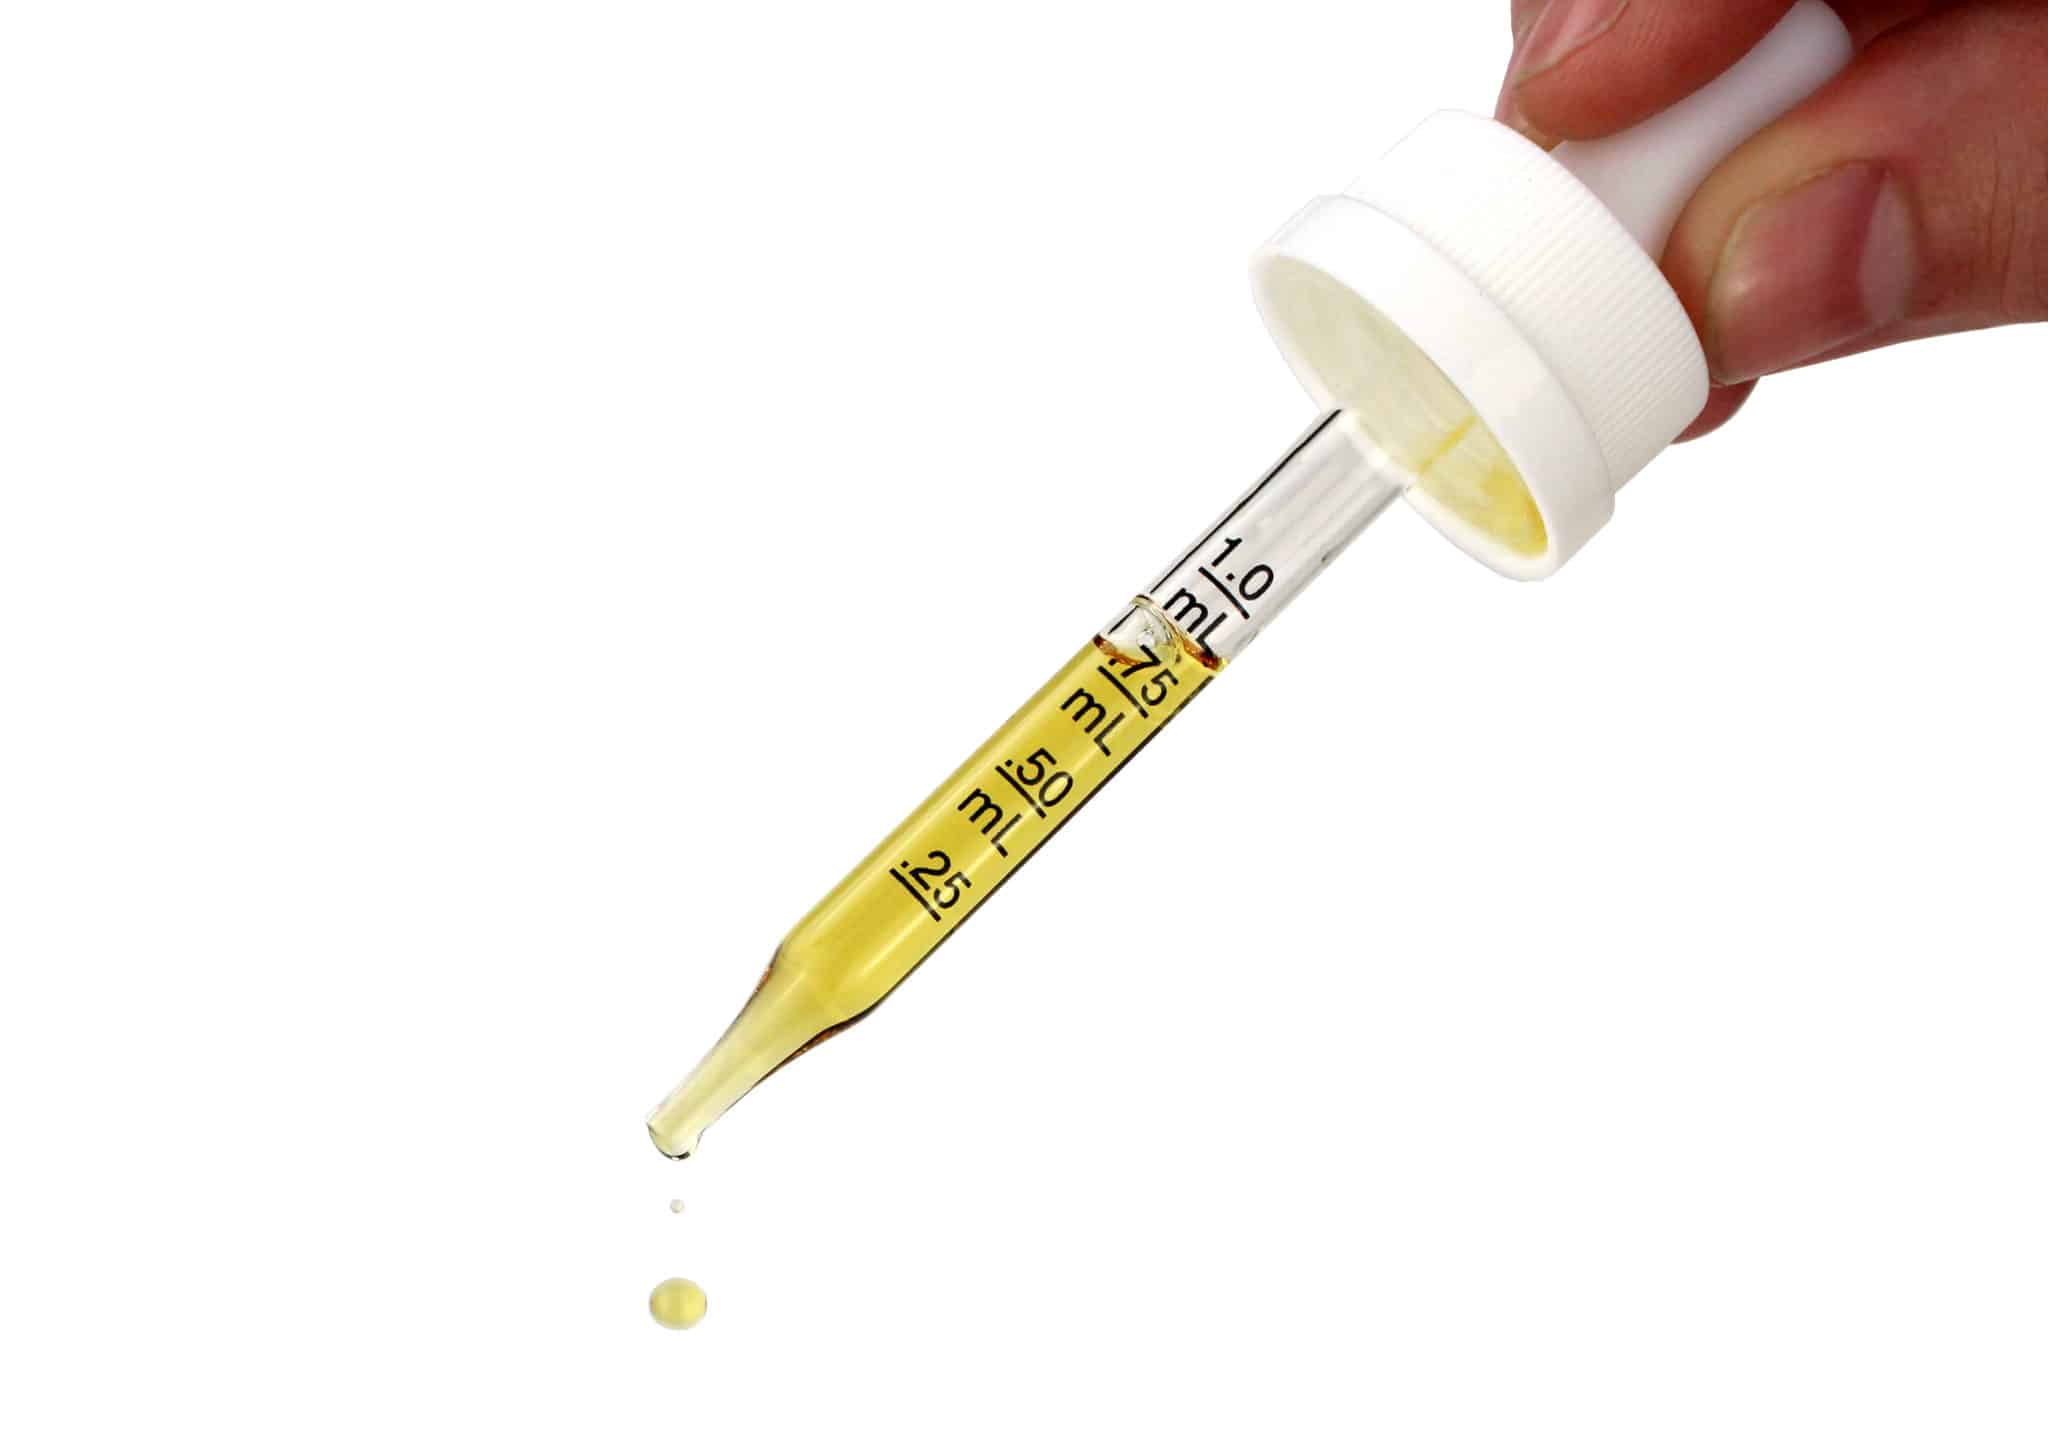 How much CBD Should you Take? Metered Droppers for Tinctures make it easy to increase your dose